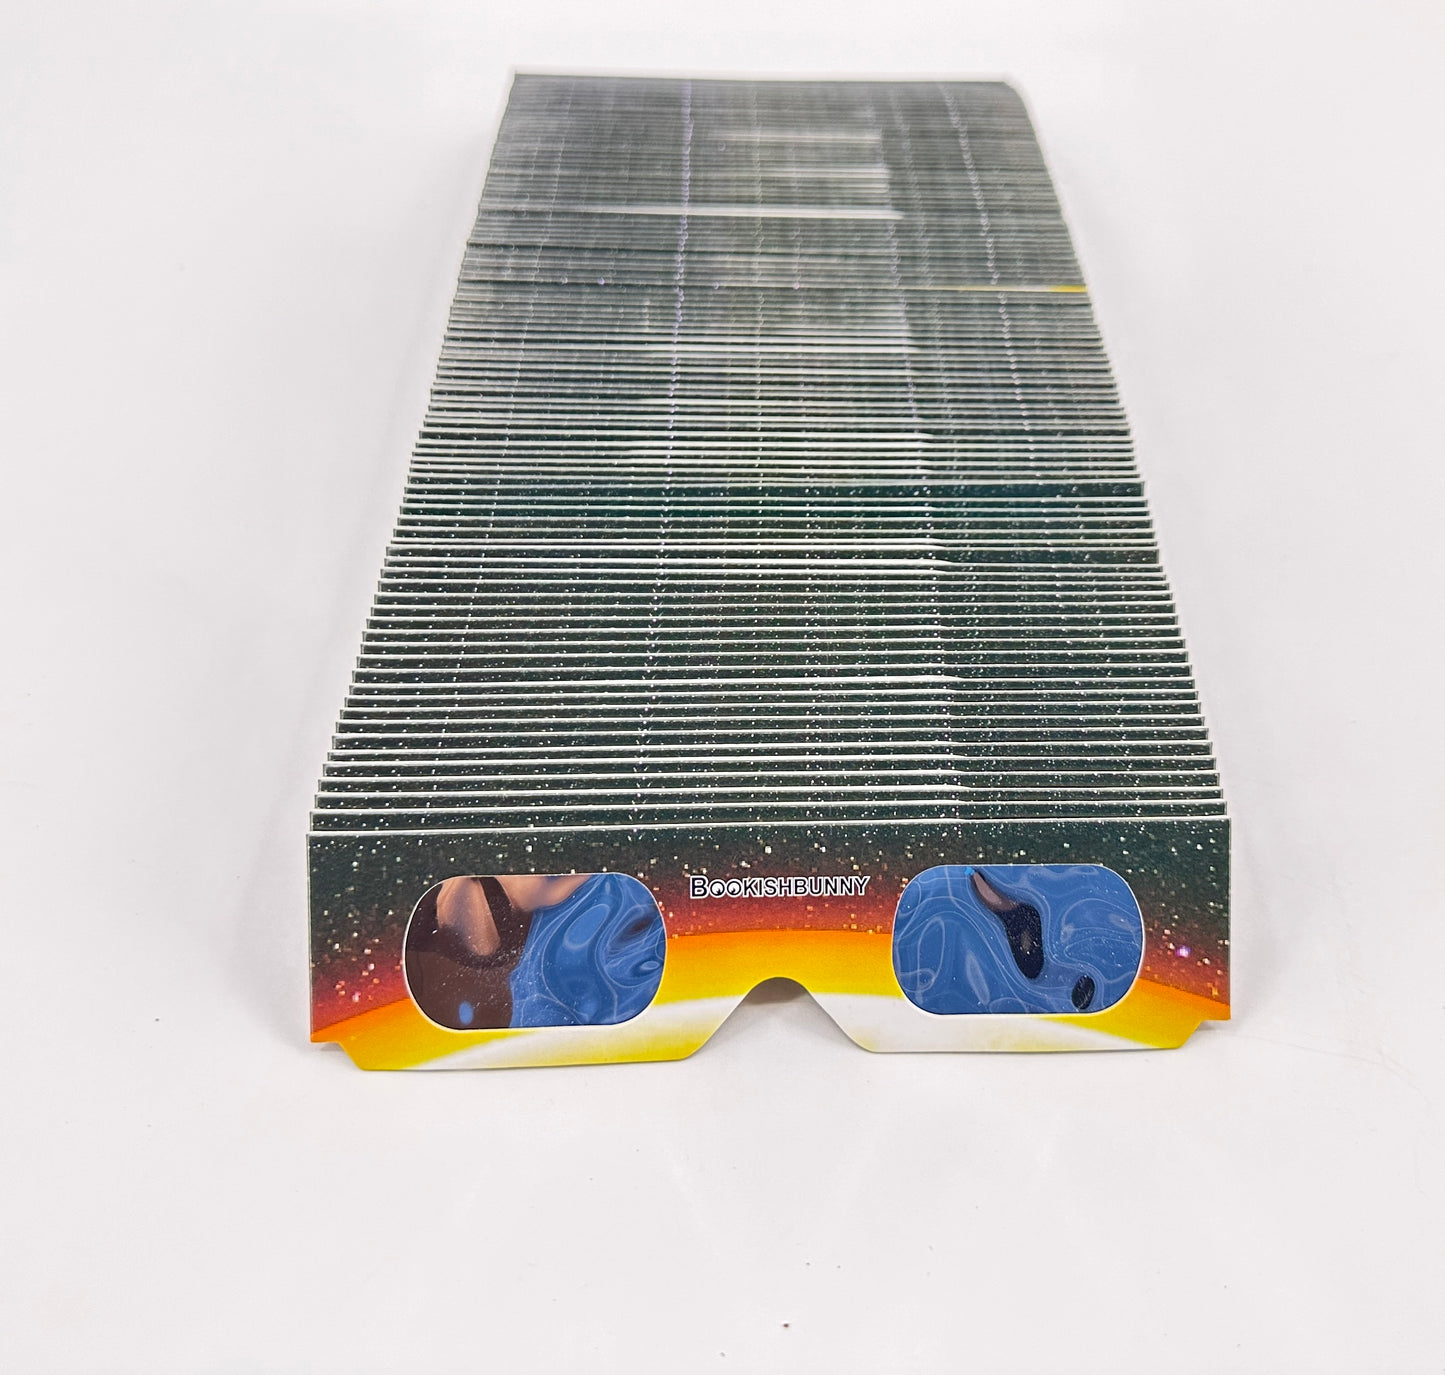 100 Pairs Bookishbunny Solar Eclipse Viewers Paper Glasses Sun Viewing